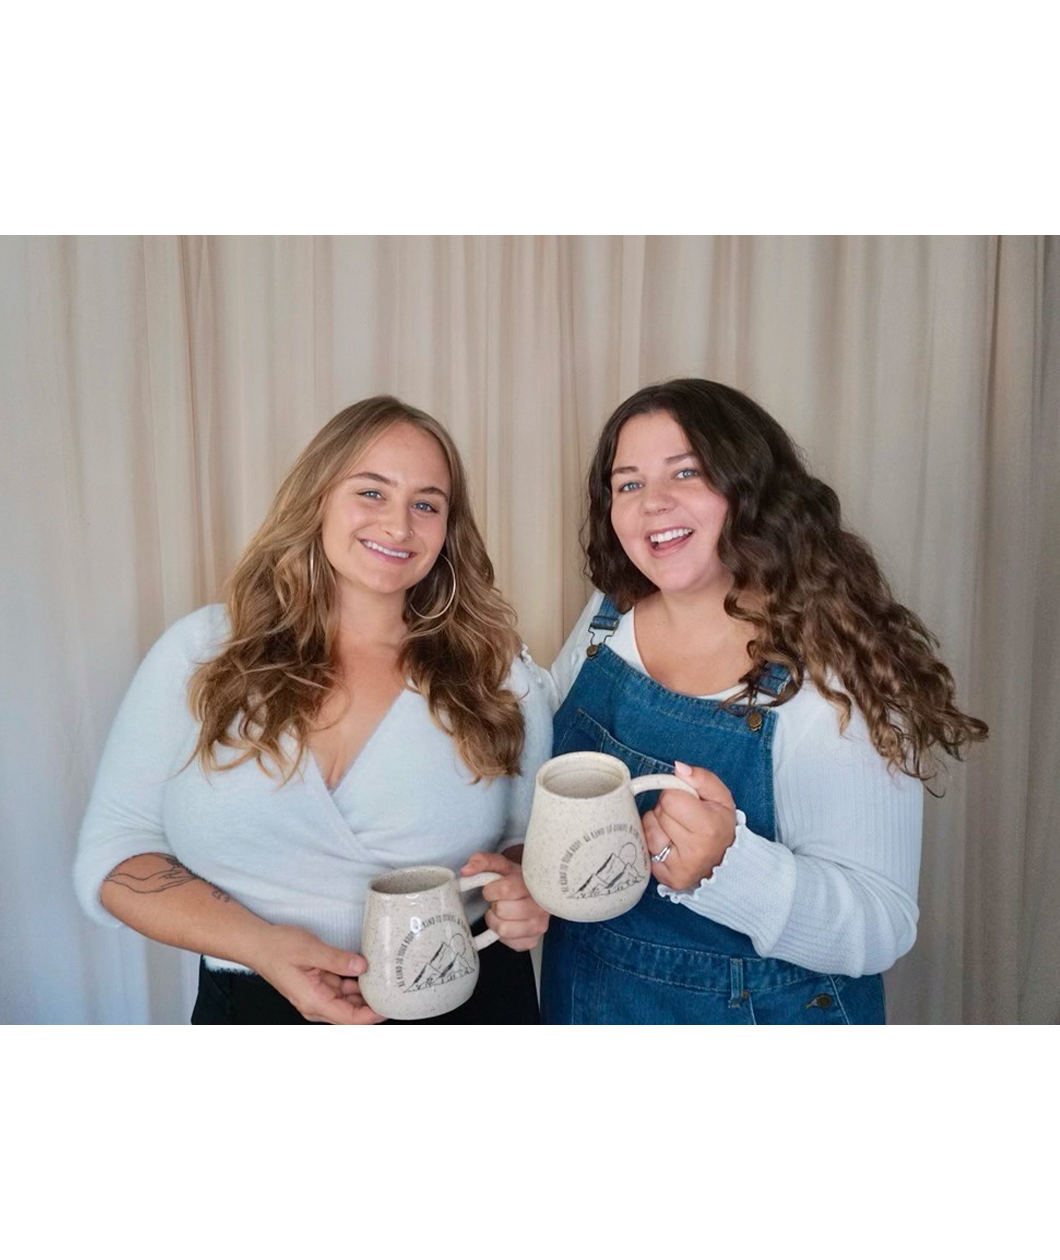 Sierra Schultzzie and a friend each holding the Be Kind mug. The mug is speckled beige with mountains and a moon. The text curves around the mountains and says "Be kind to your body be kind to others be kind to the planet".